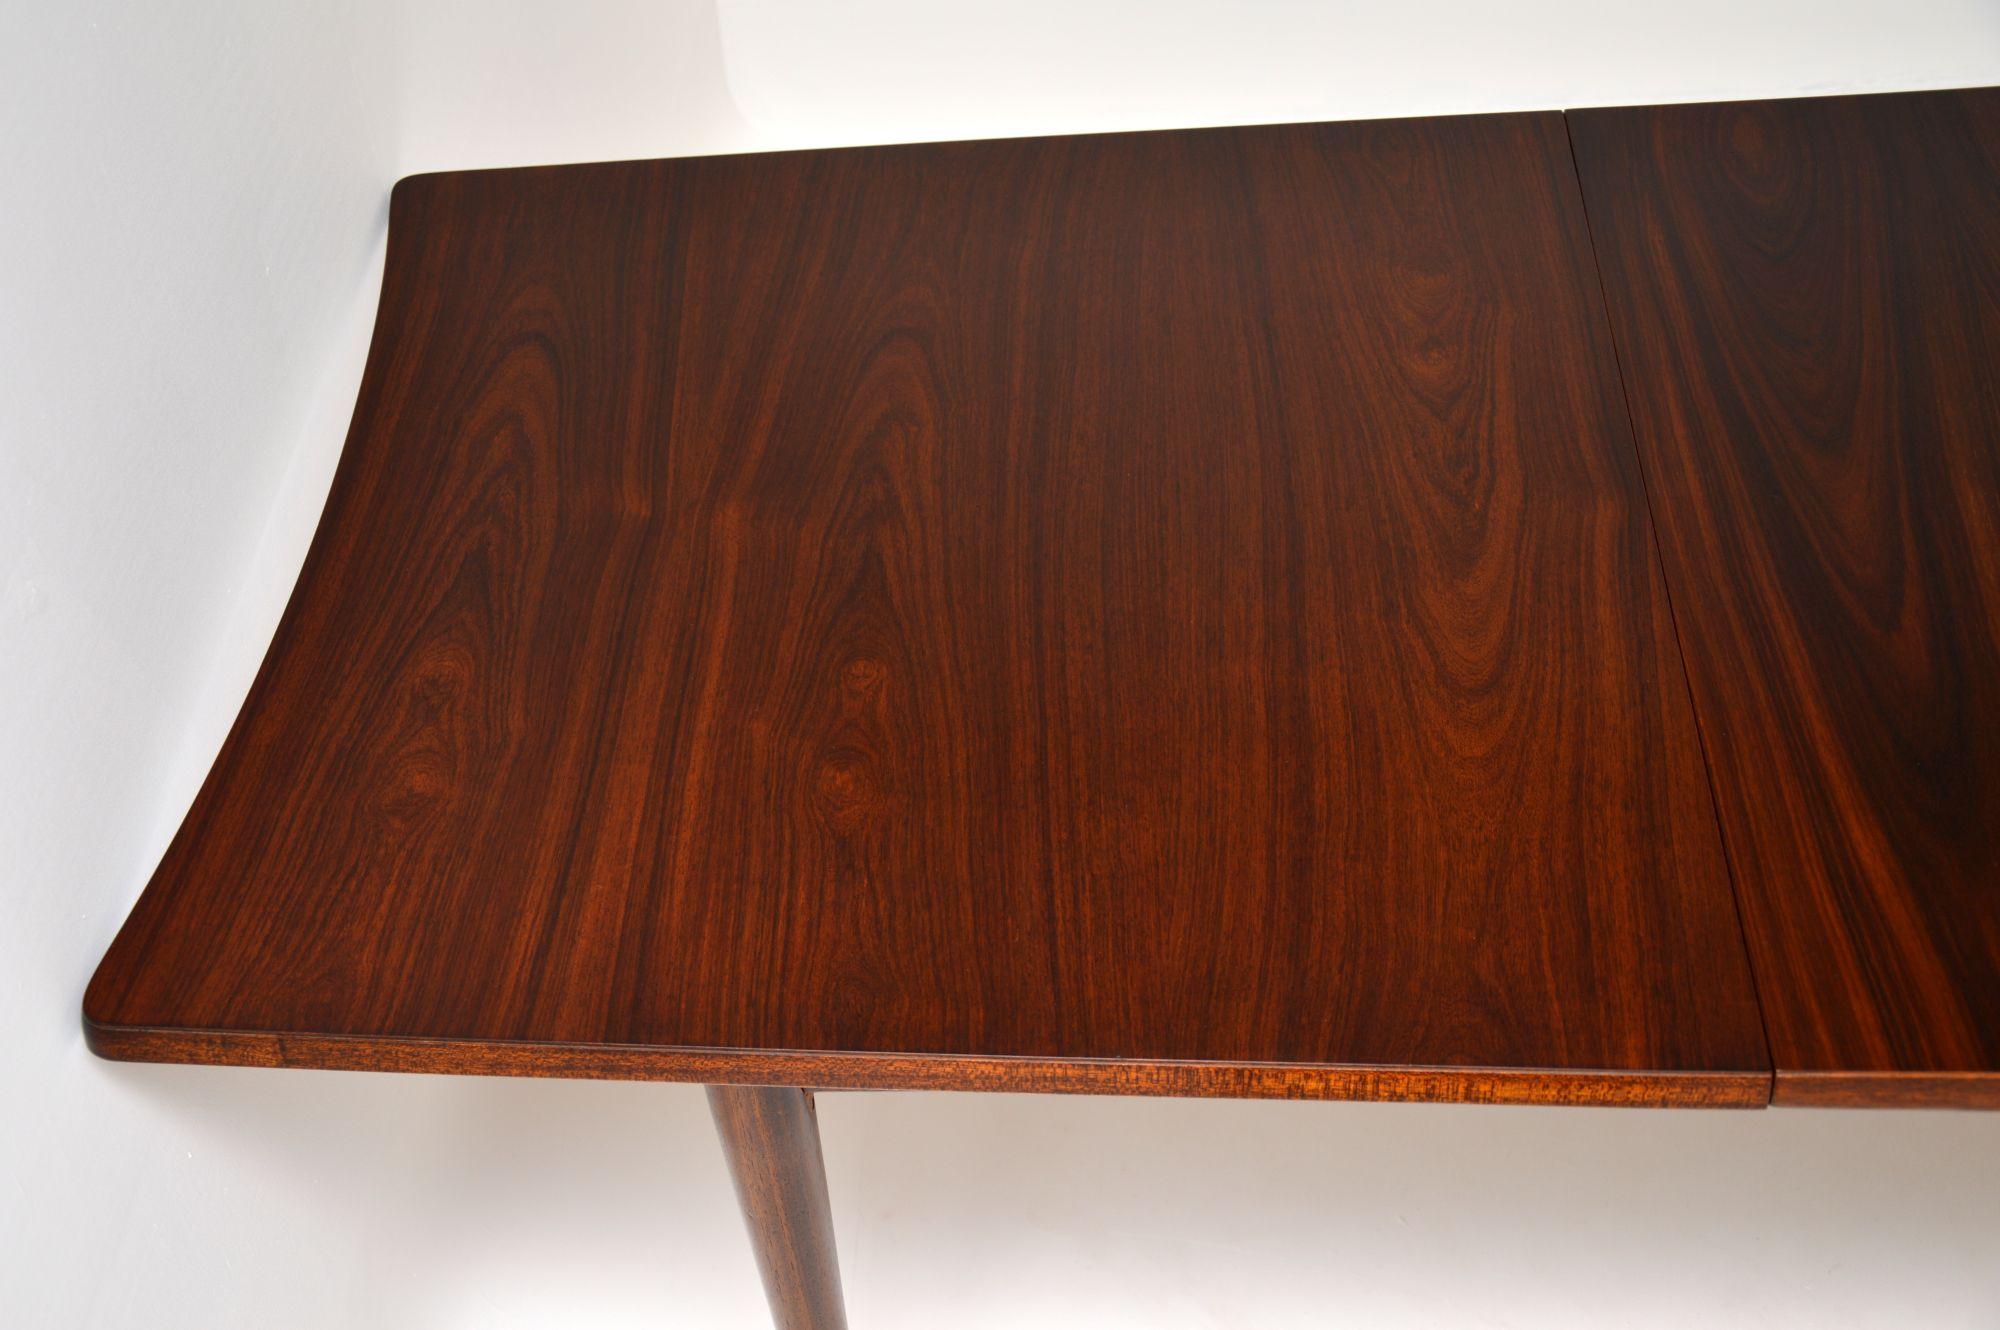 British 1960s Vintage Extending Dining Table by Uniflex